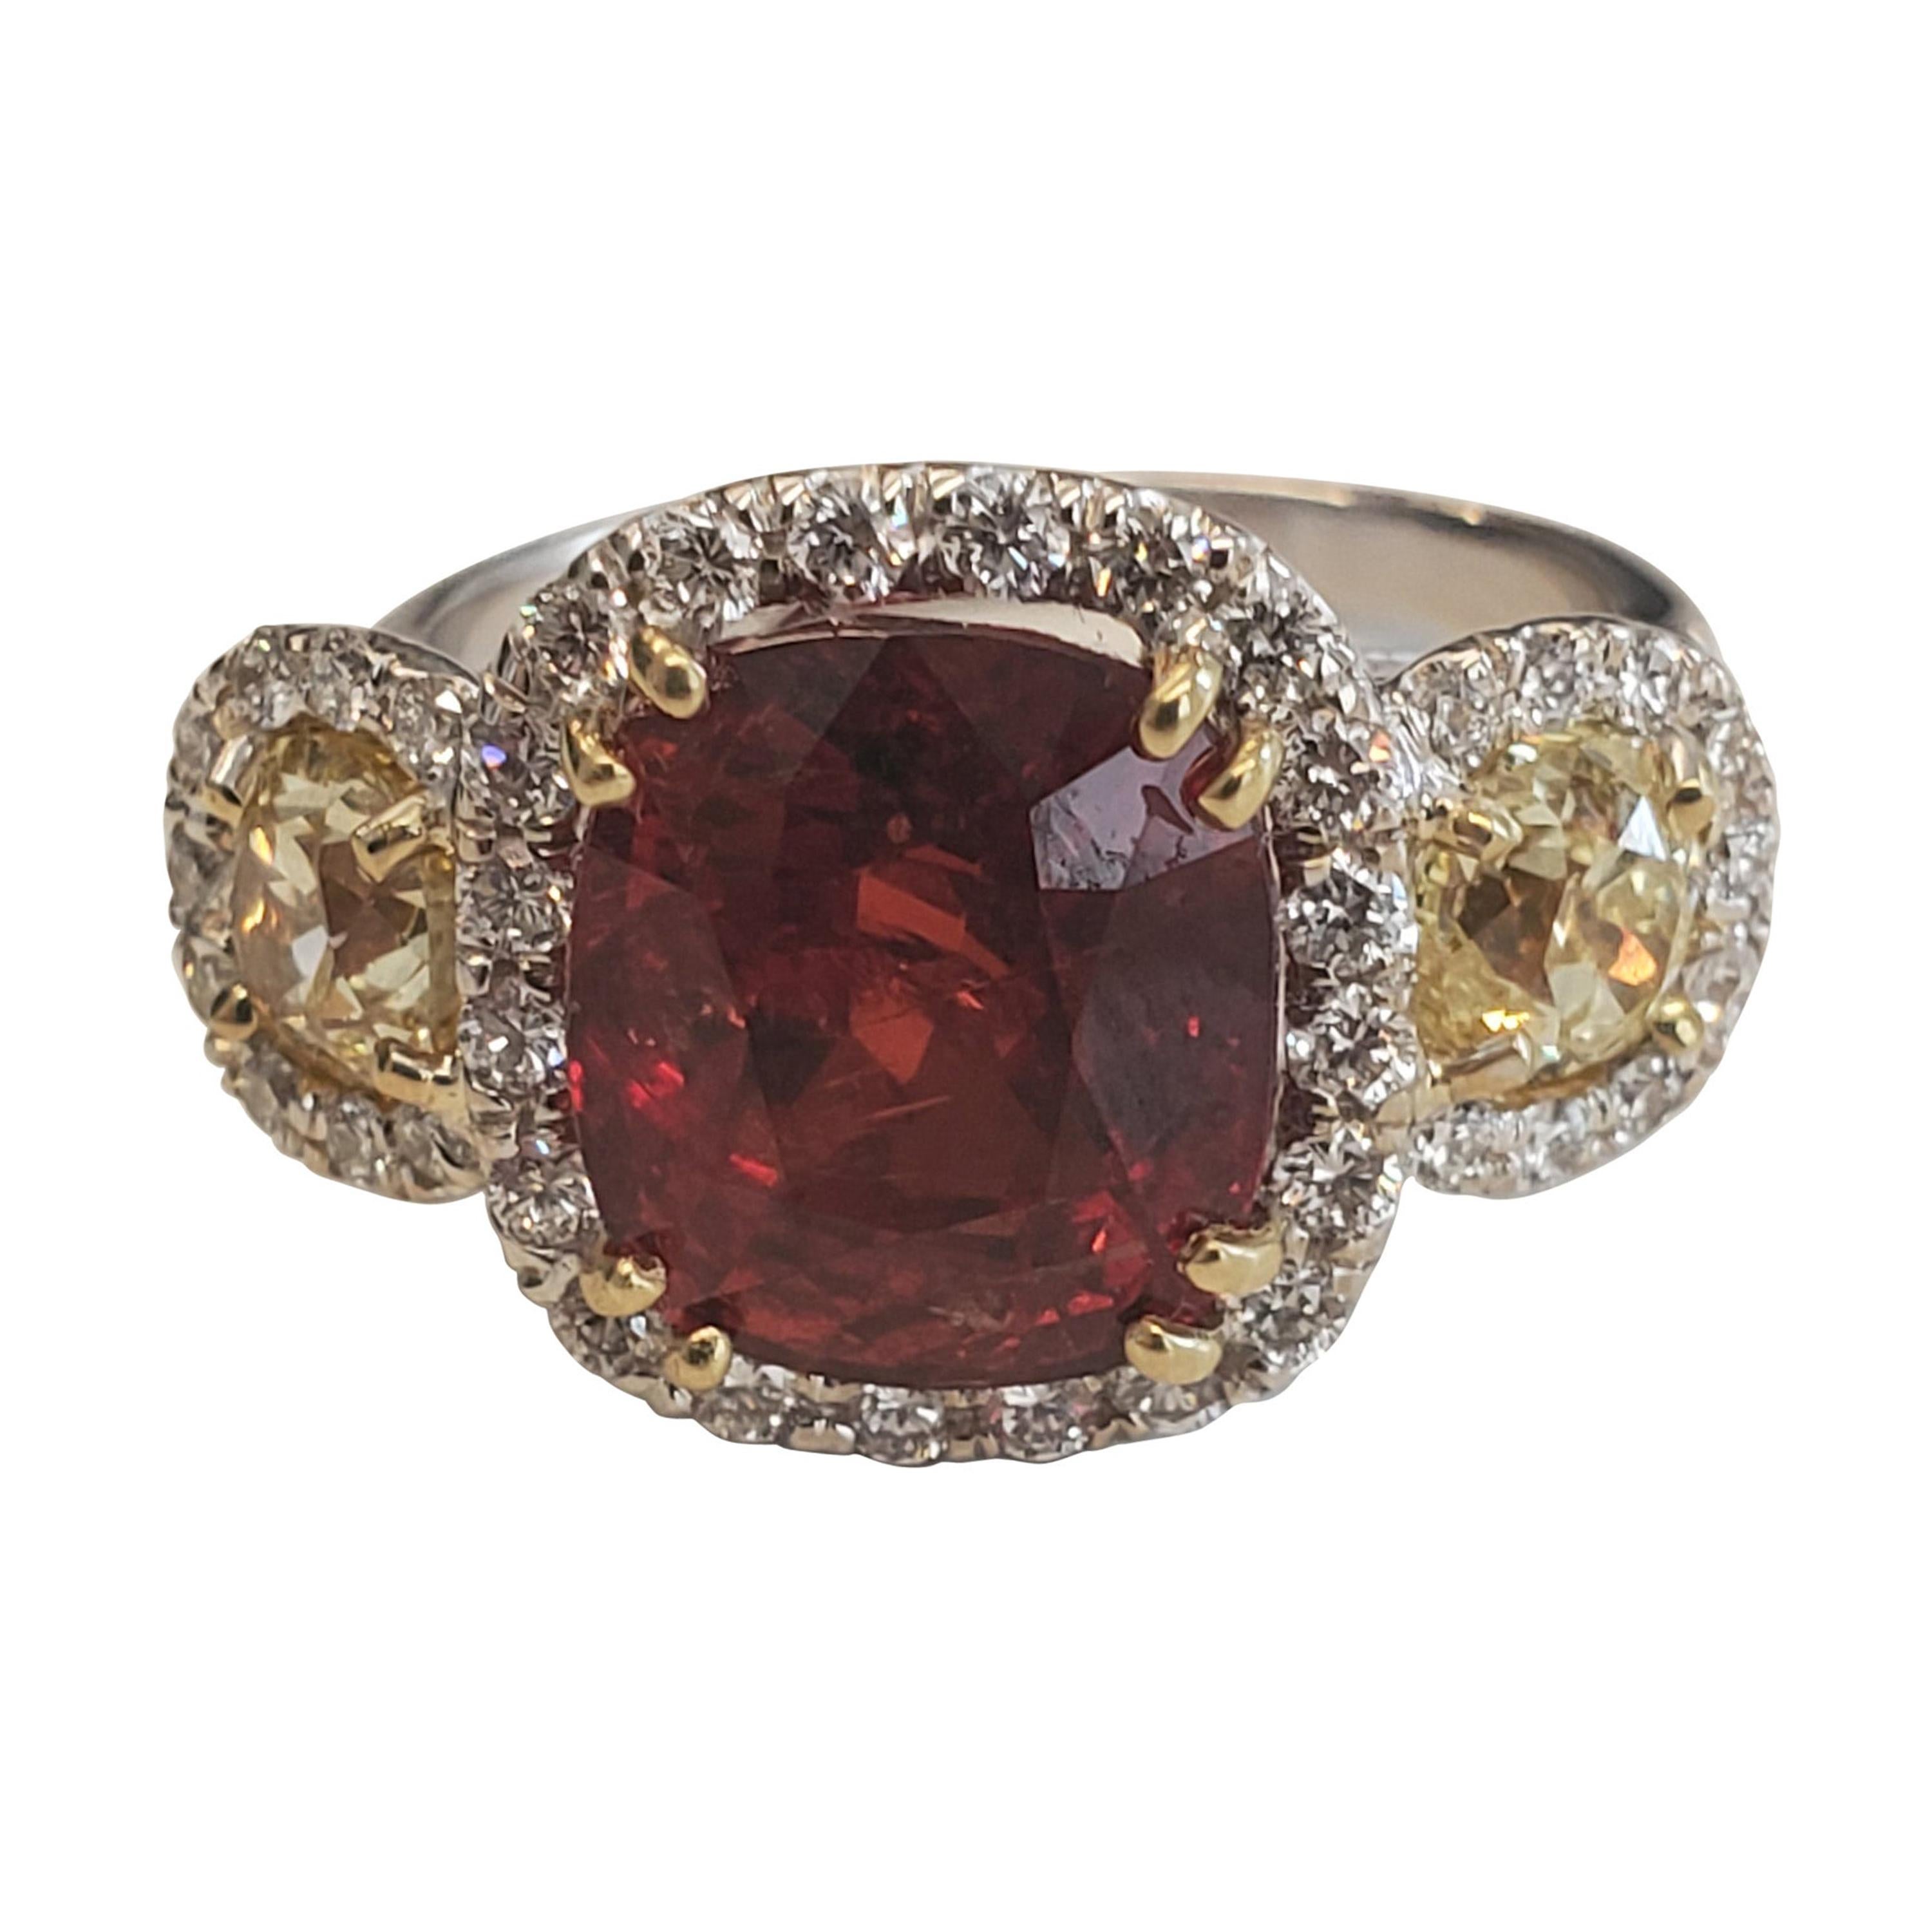 4.91 Carat Cushion Cut Red Spinel & Diamond Ring in 18k White Gold For Sale